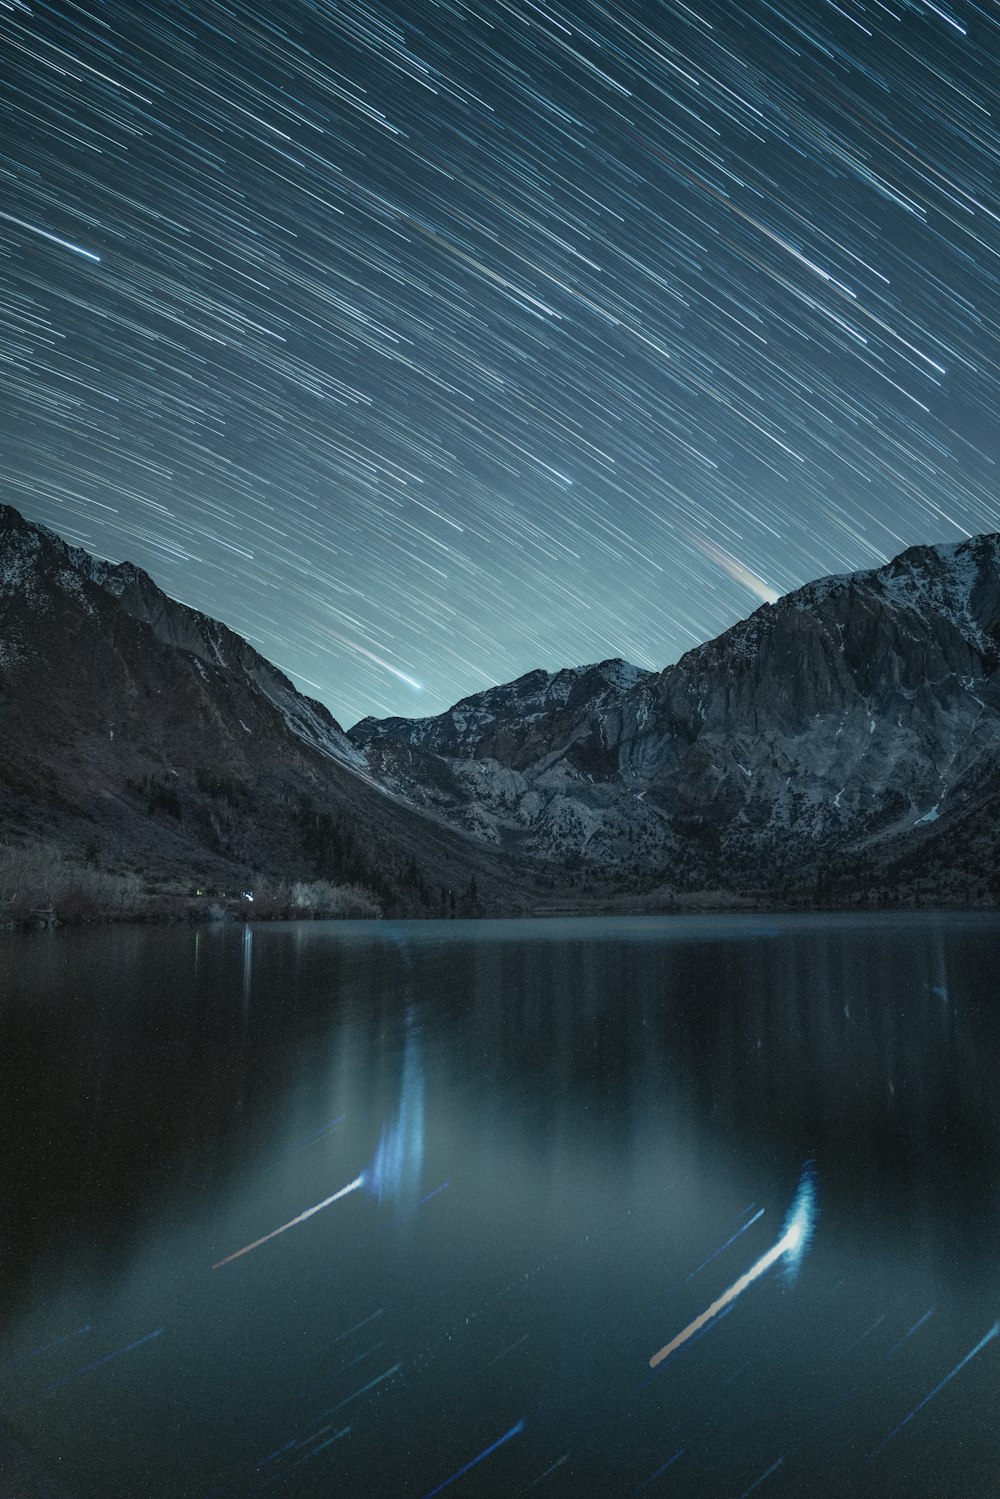 the night sky is lit up over a mountain lake